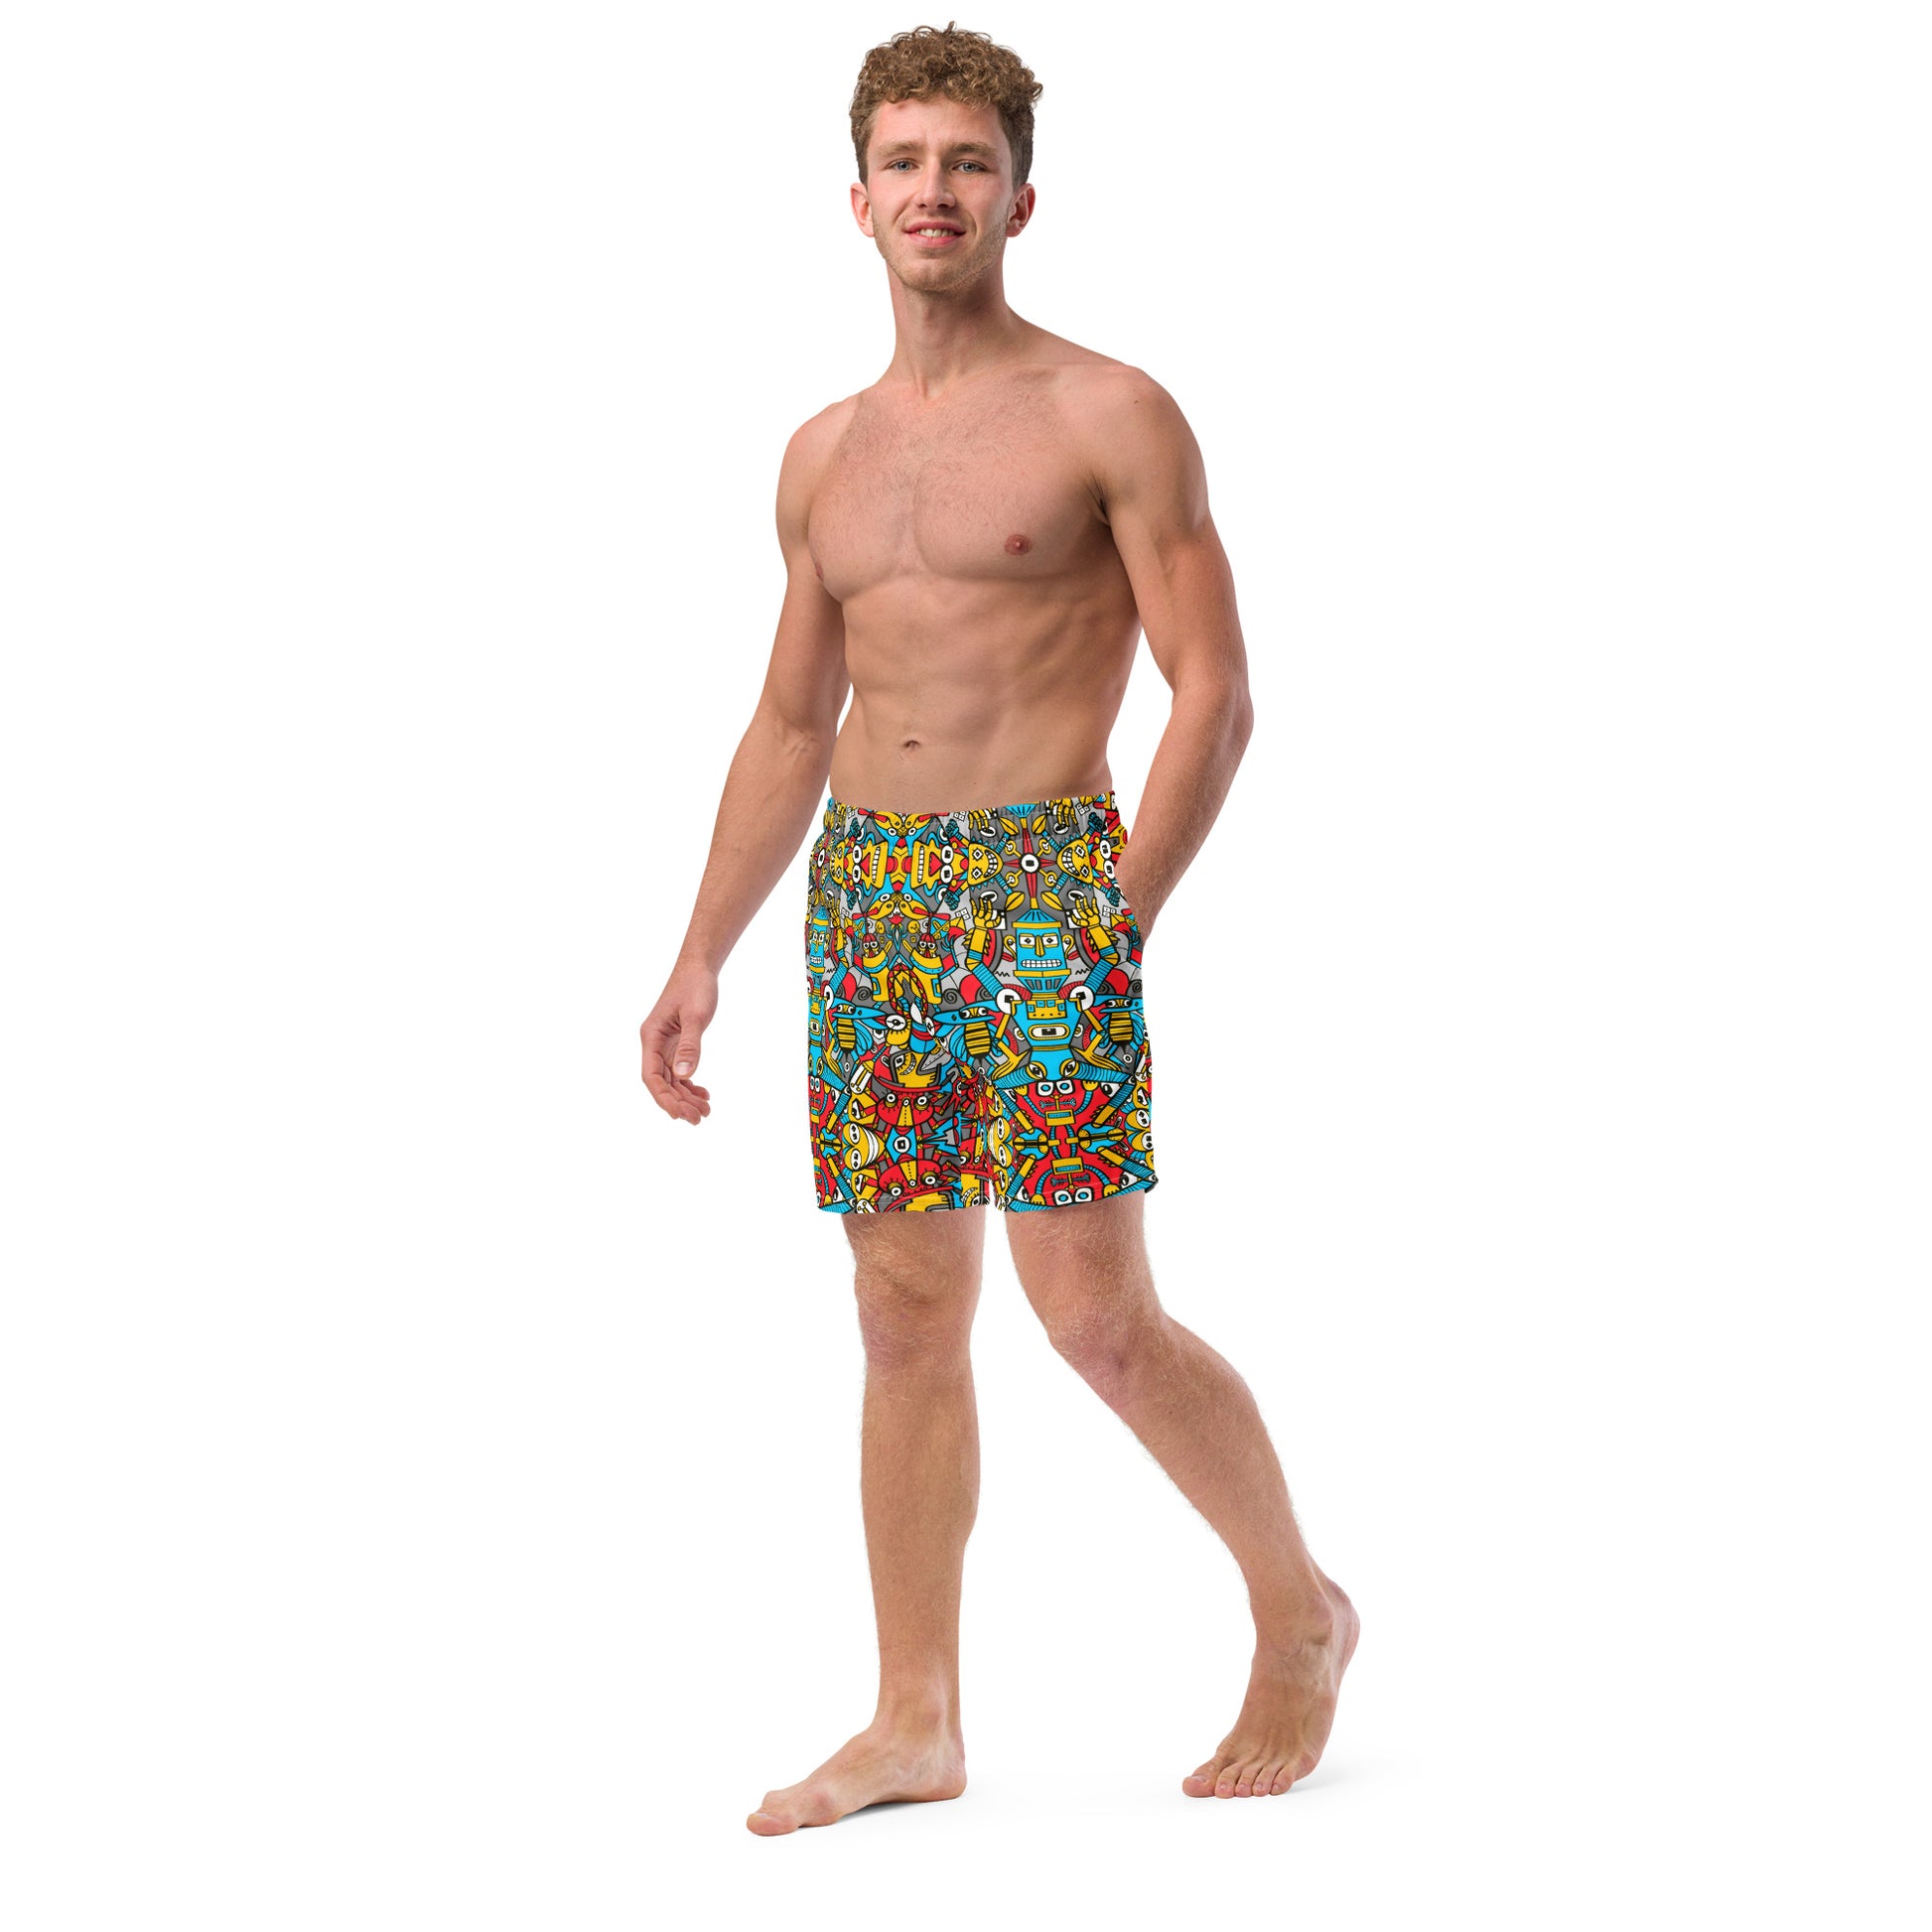 Young man wearing Men's swim trunks all-over printed with Crazy robots rising from dust in lively backyards